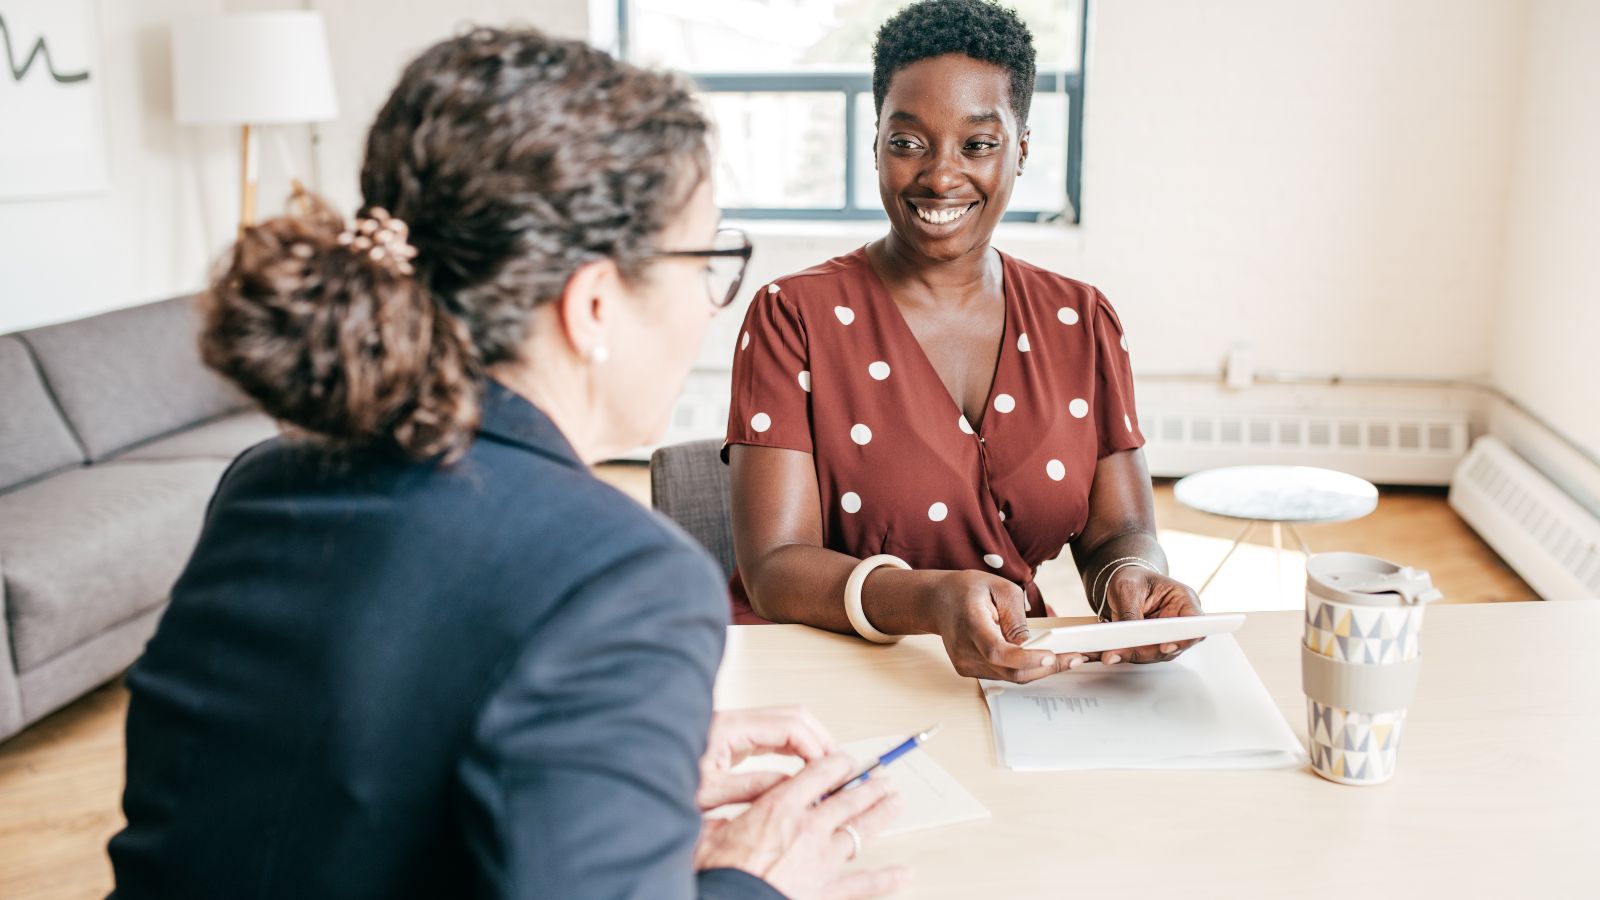 Photo of two women talking at a table to illustrate Mentoring a New Employee